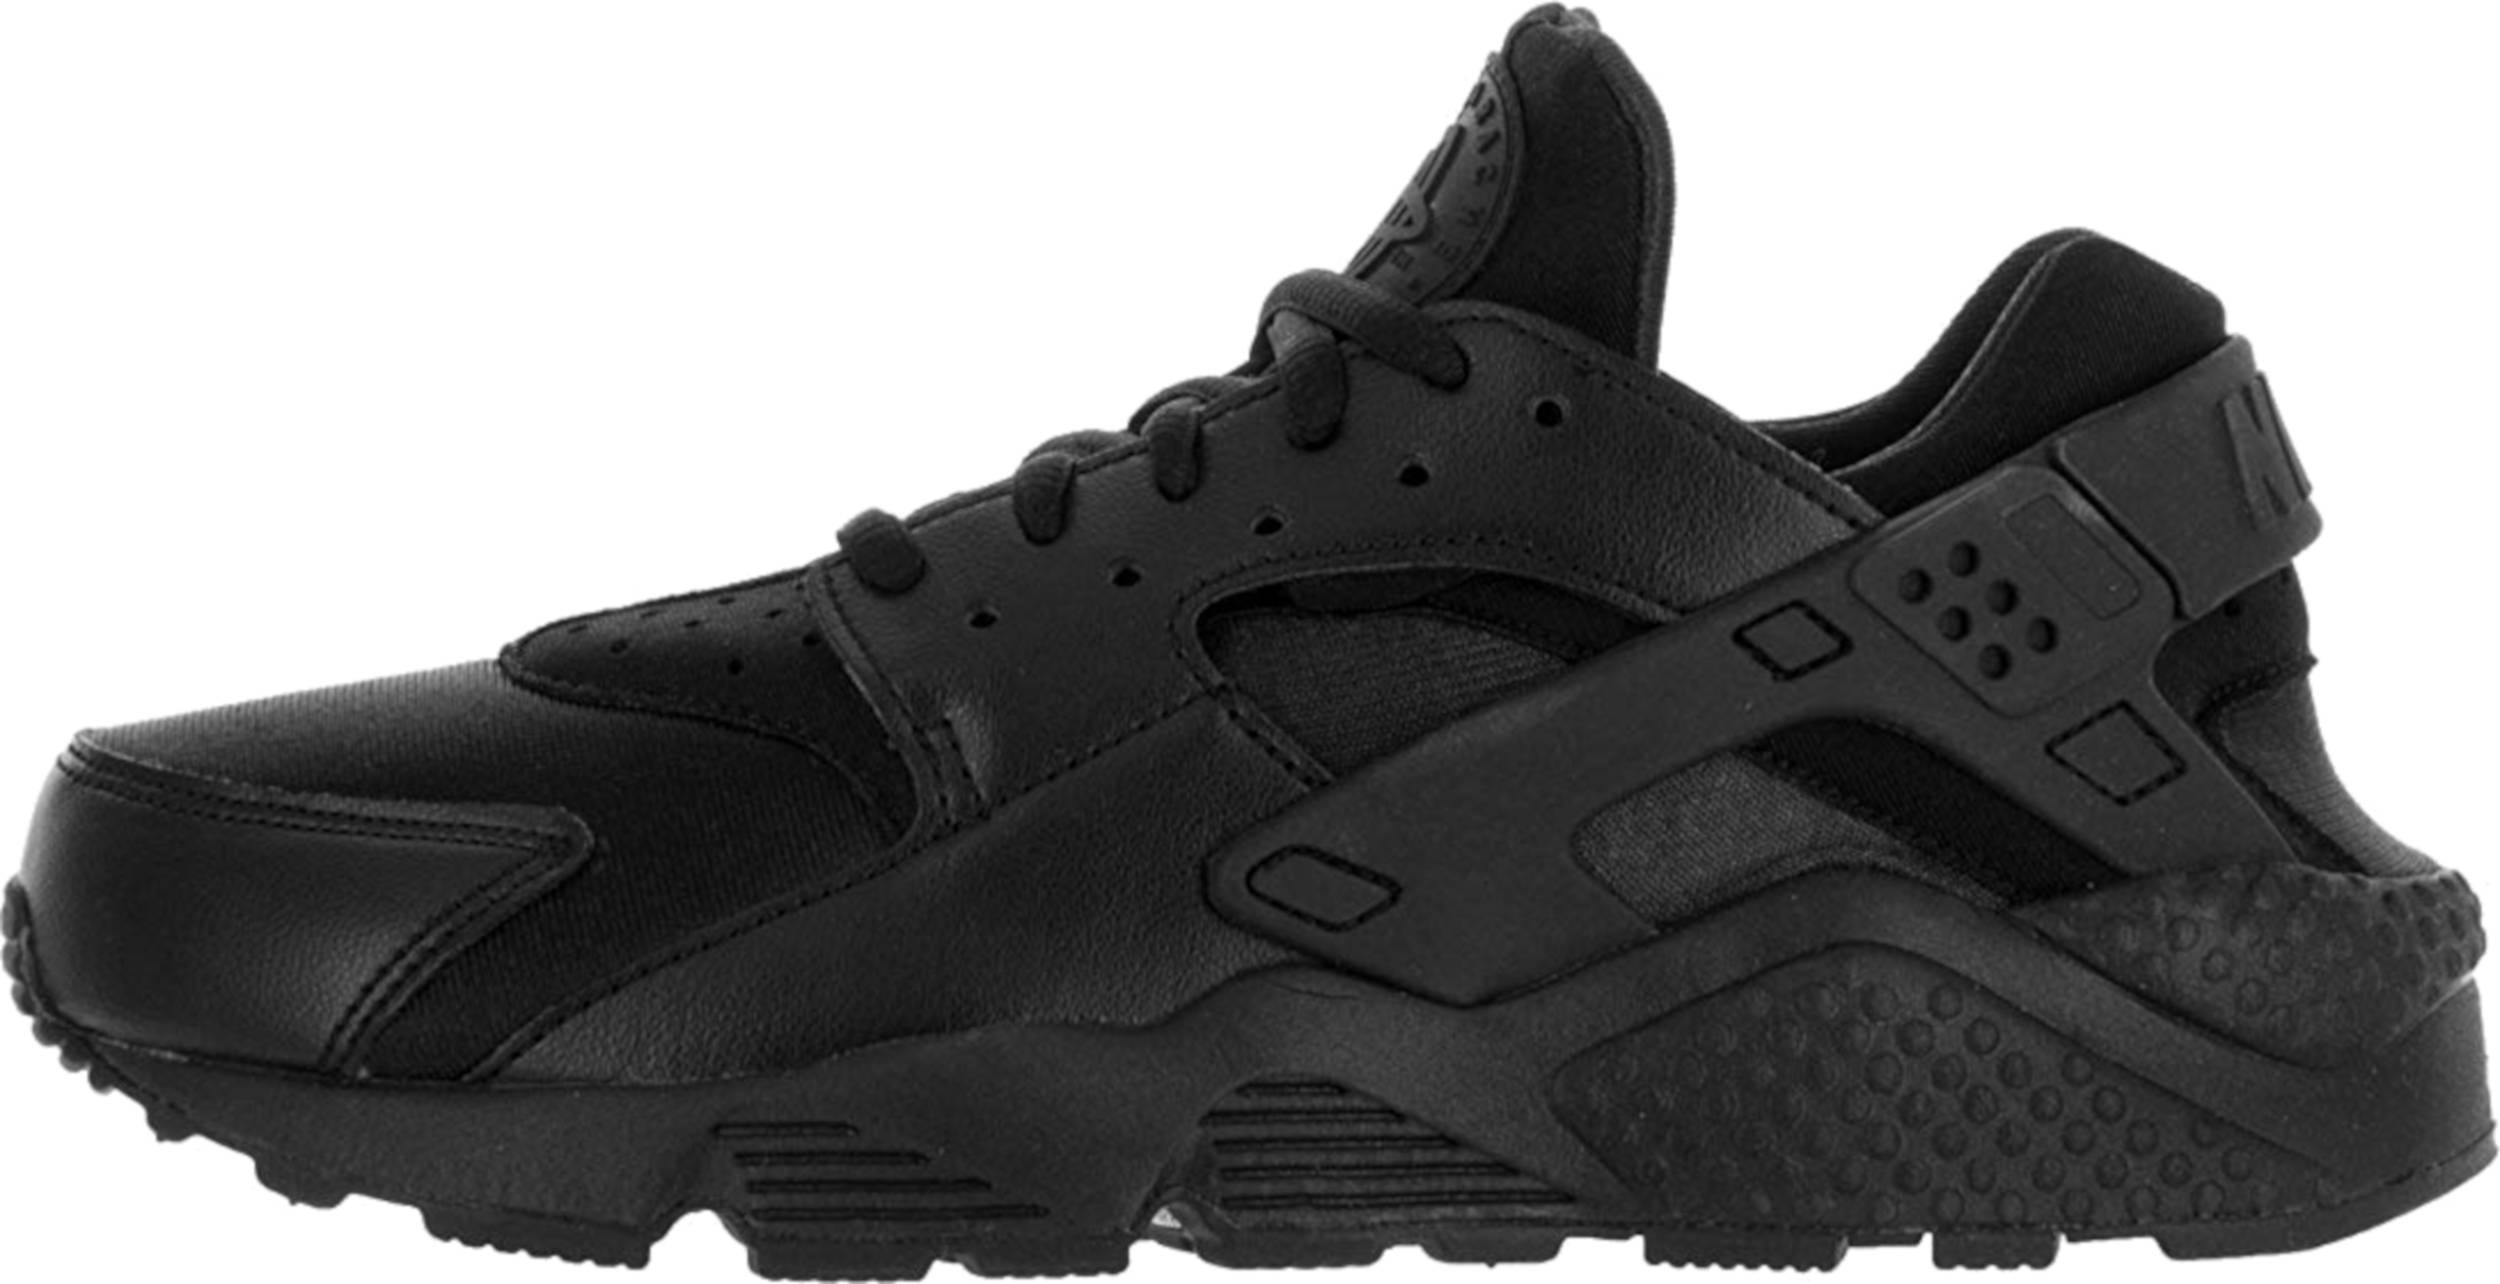 Only $90 + Review of Nike Air Huarache 